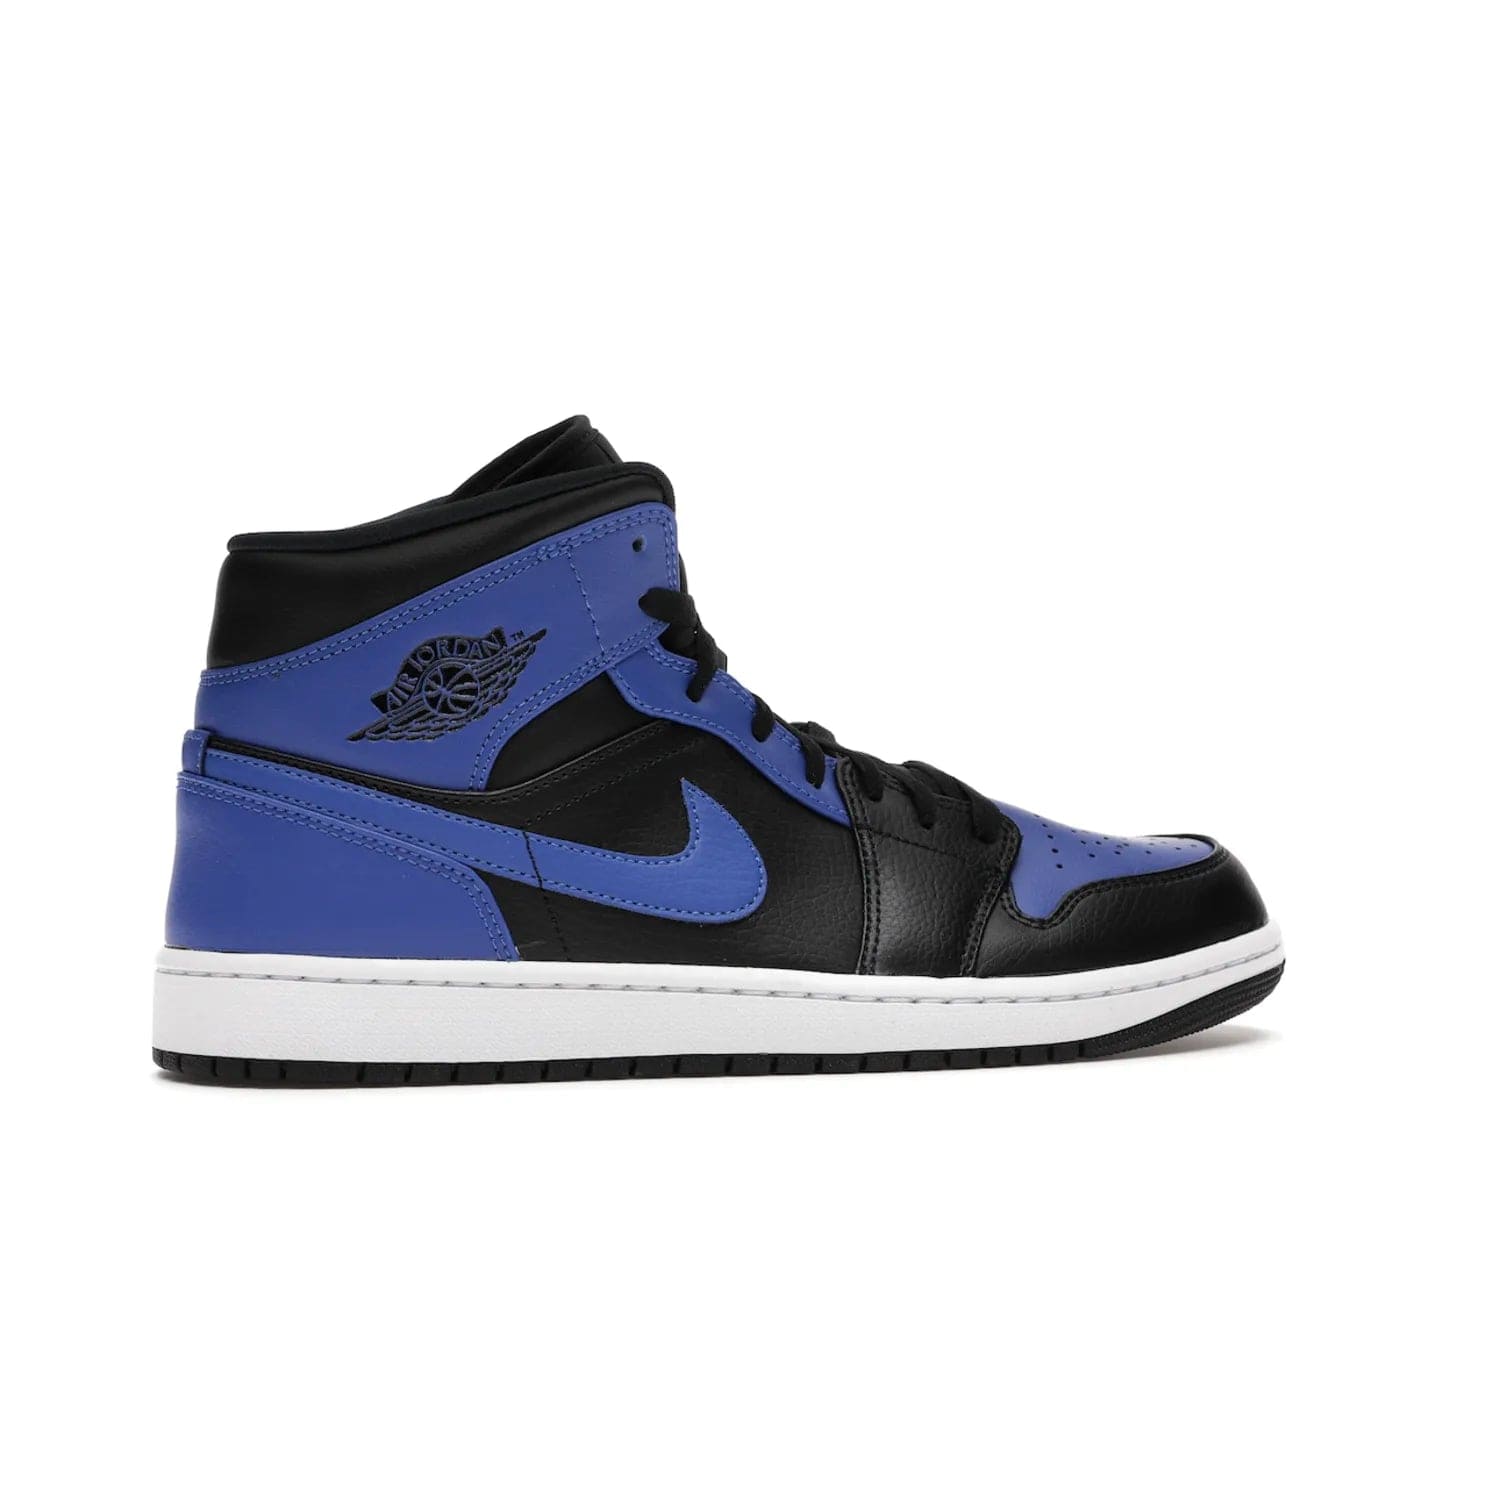 Jordan 1 Mid Hyper Royal Tumbled Leather - Image 35 - Only at www.BallersClubKickz.com - Iconic colorway of the Air Jordan 1 Mid Black Royal Tumbled Leather. Features a black tumbled leather upper, royal blue leather overlays, white midsole & black rubber outsole. Released December 2020. Adds premium style to any collection.